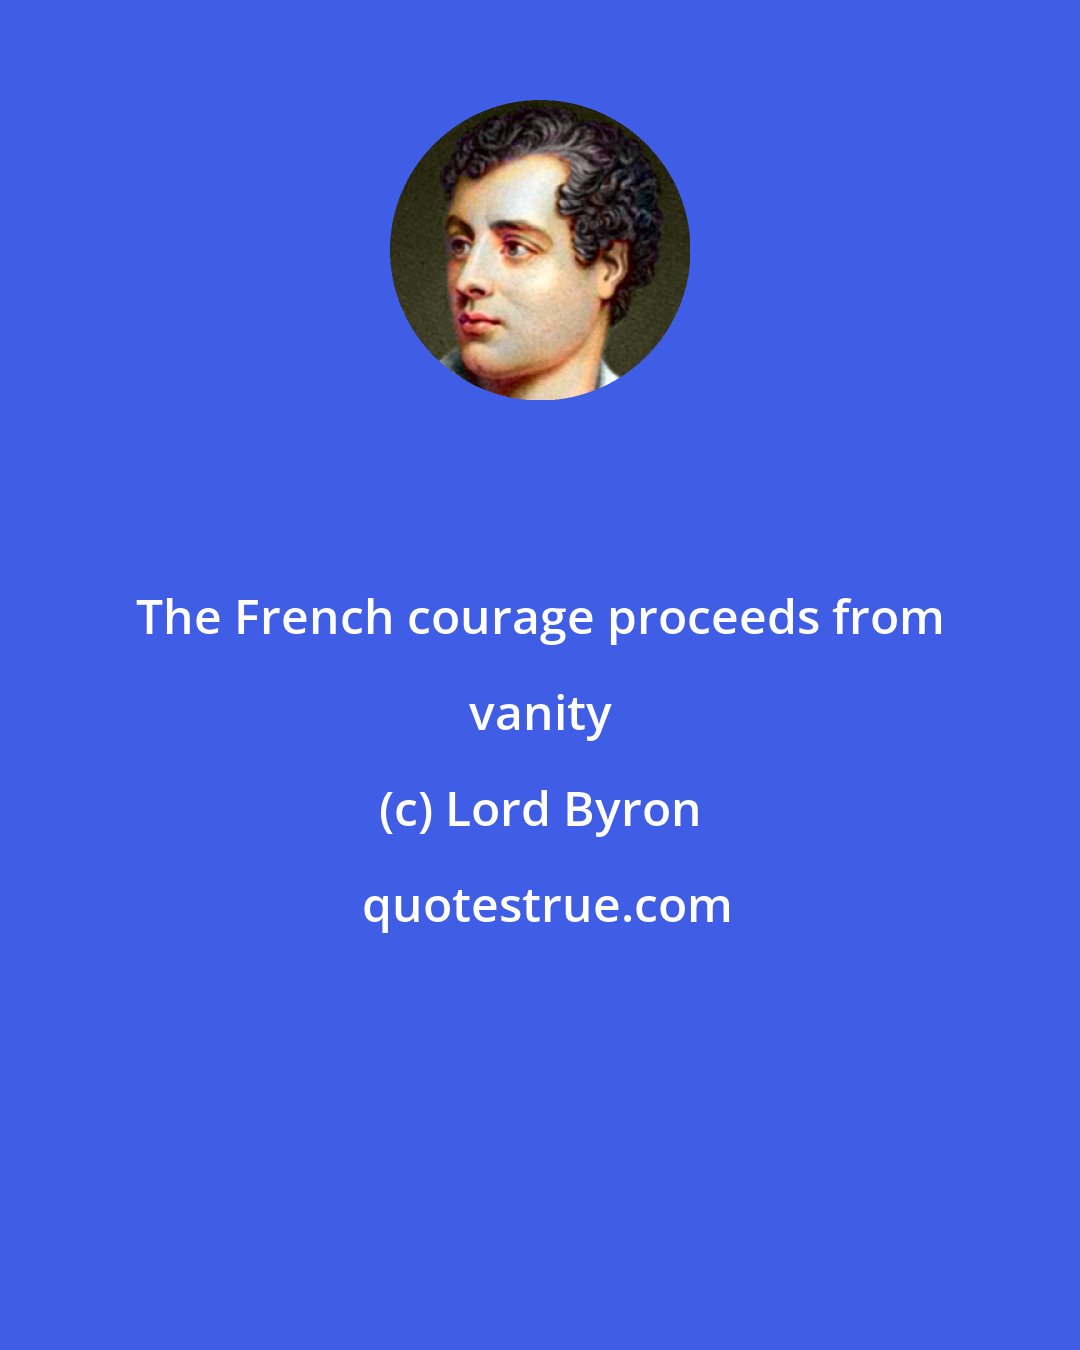 Lord Byron: The French courage proceeds from vanity